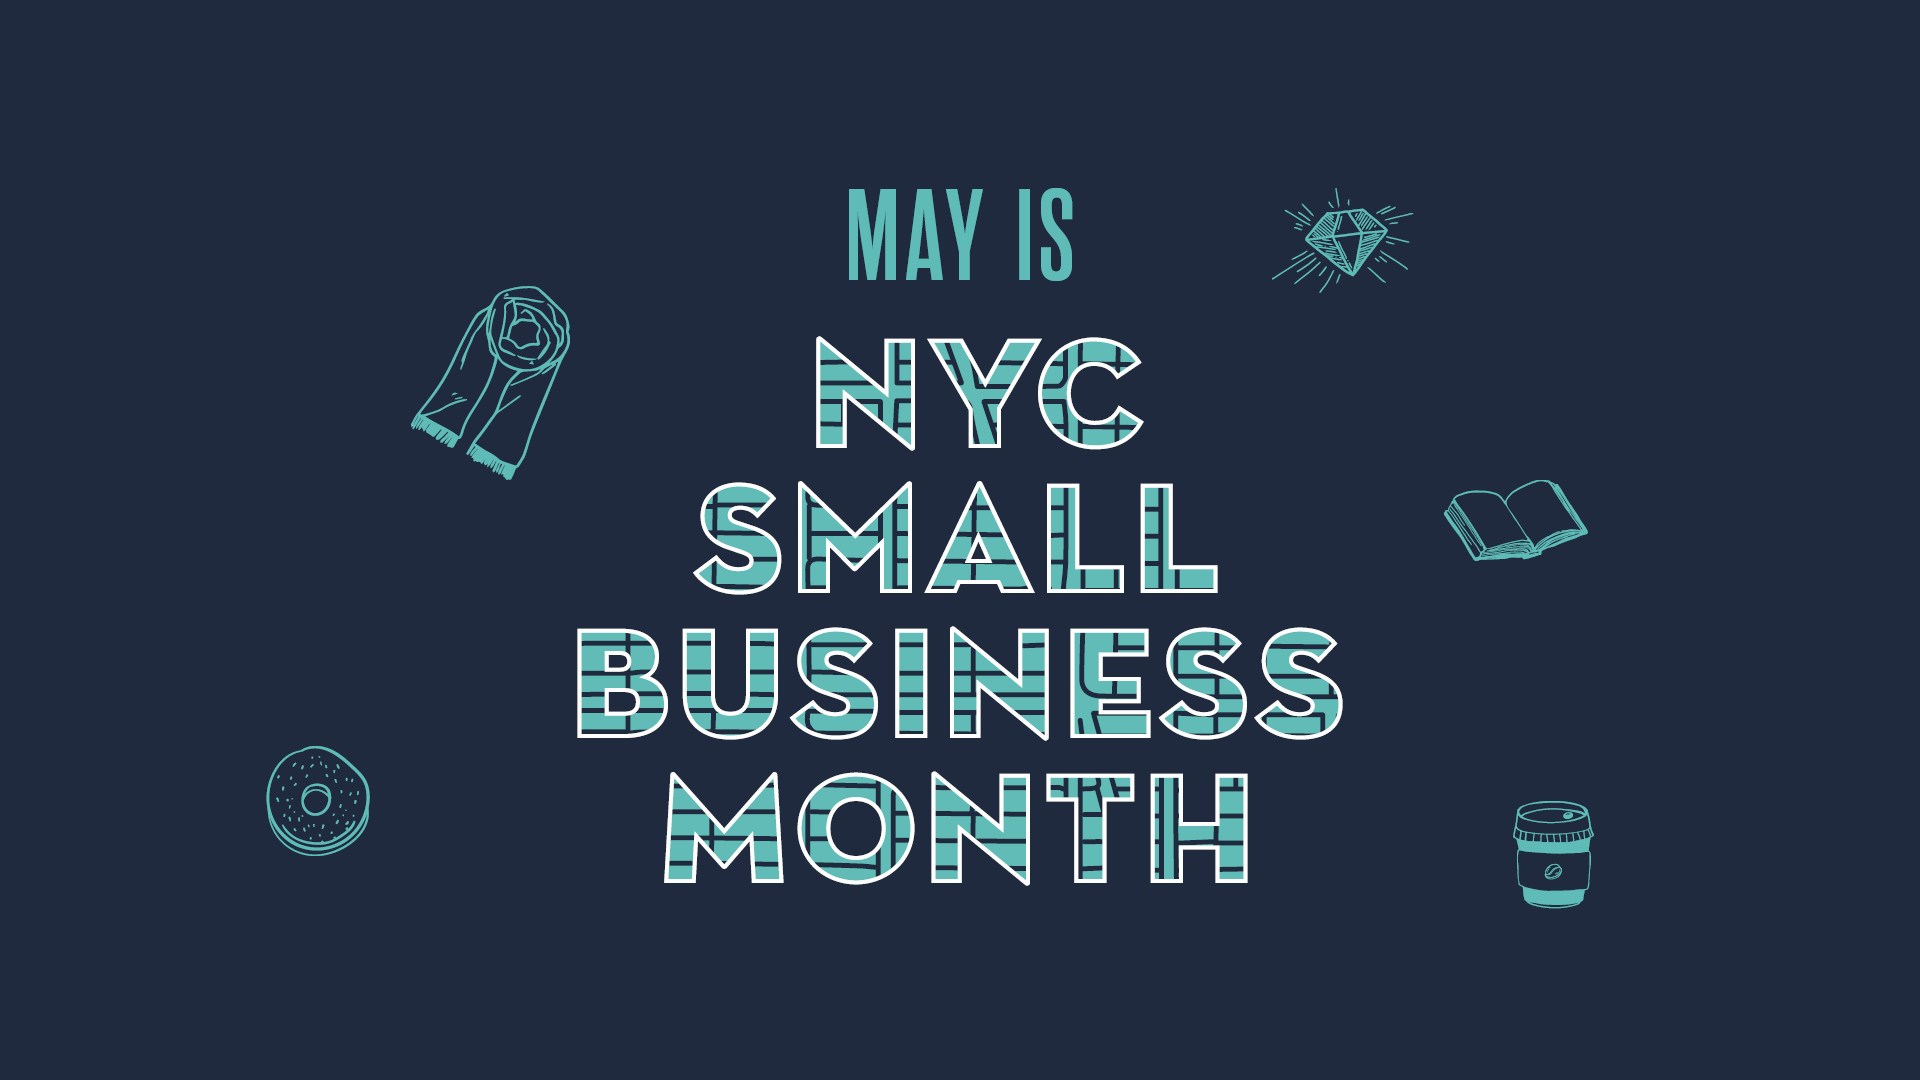 Promotional graphic with icons of items to purchase and text "May is NYC Small Business Month"